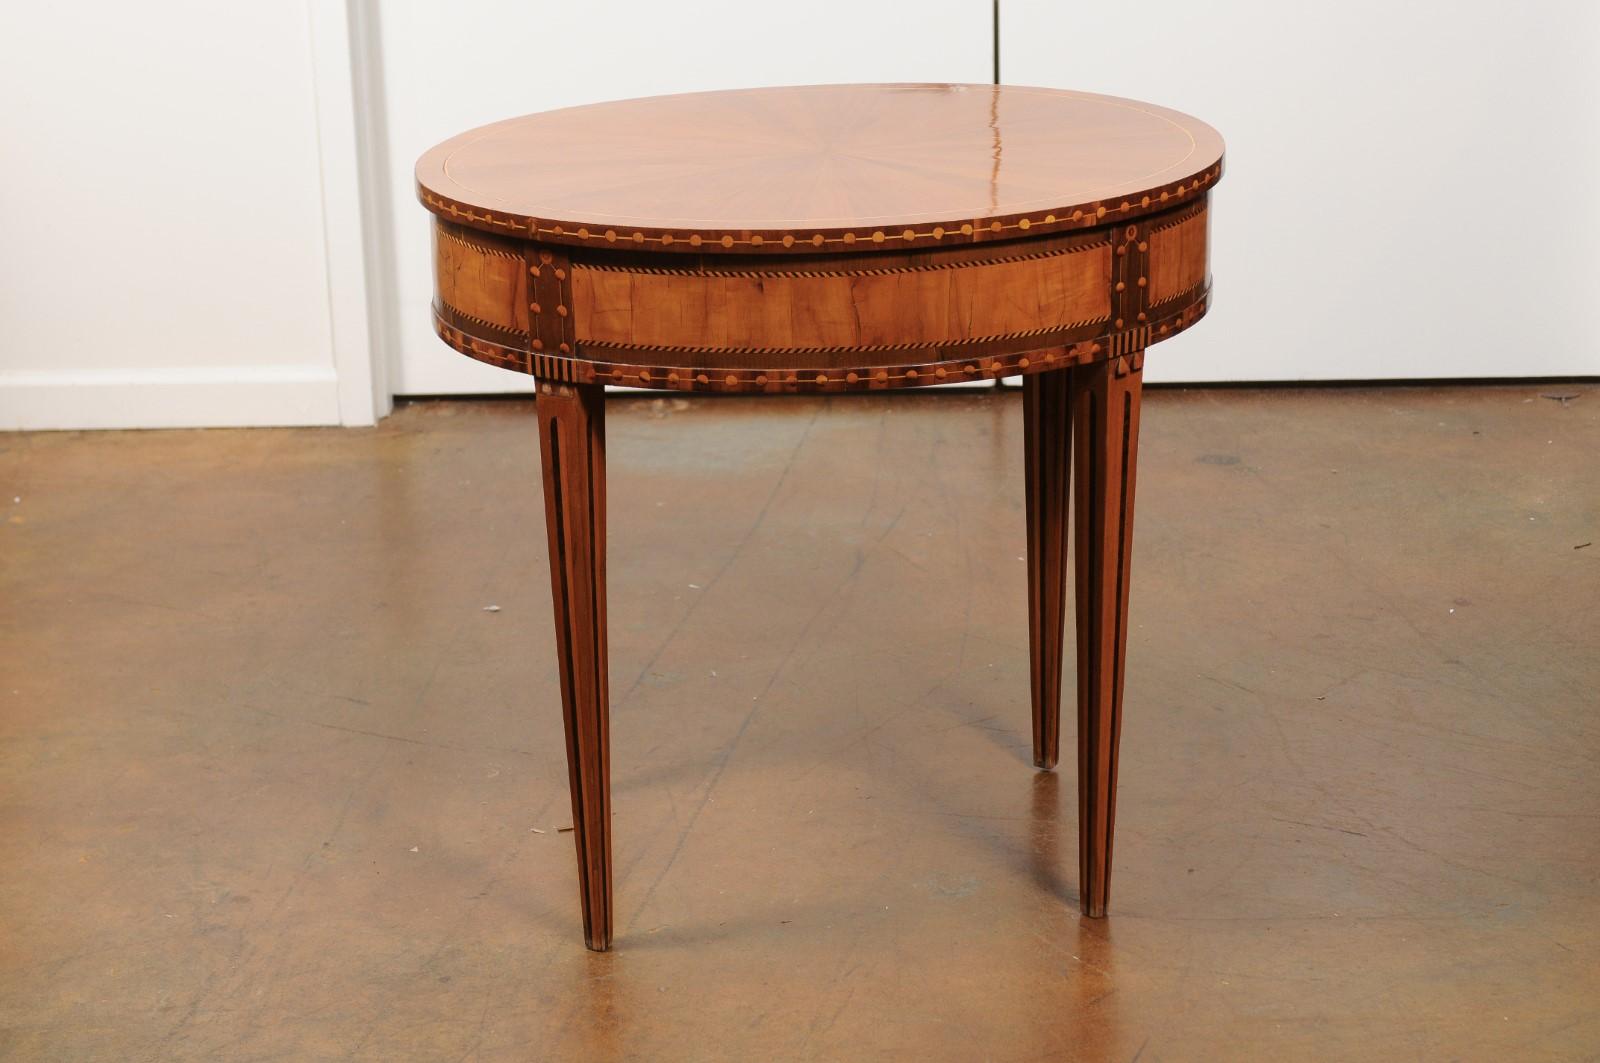 French 19th Century Oval Walnut and Satinwood Inlaid Table with Radiating Veneer 1